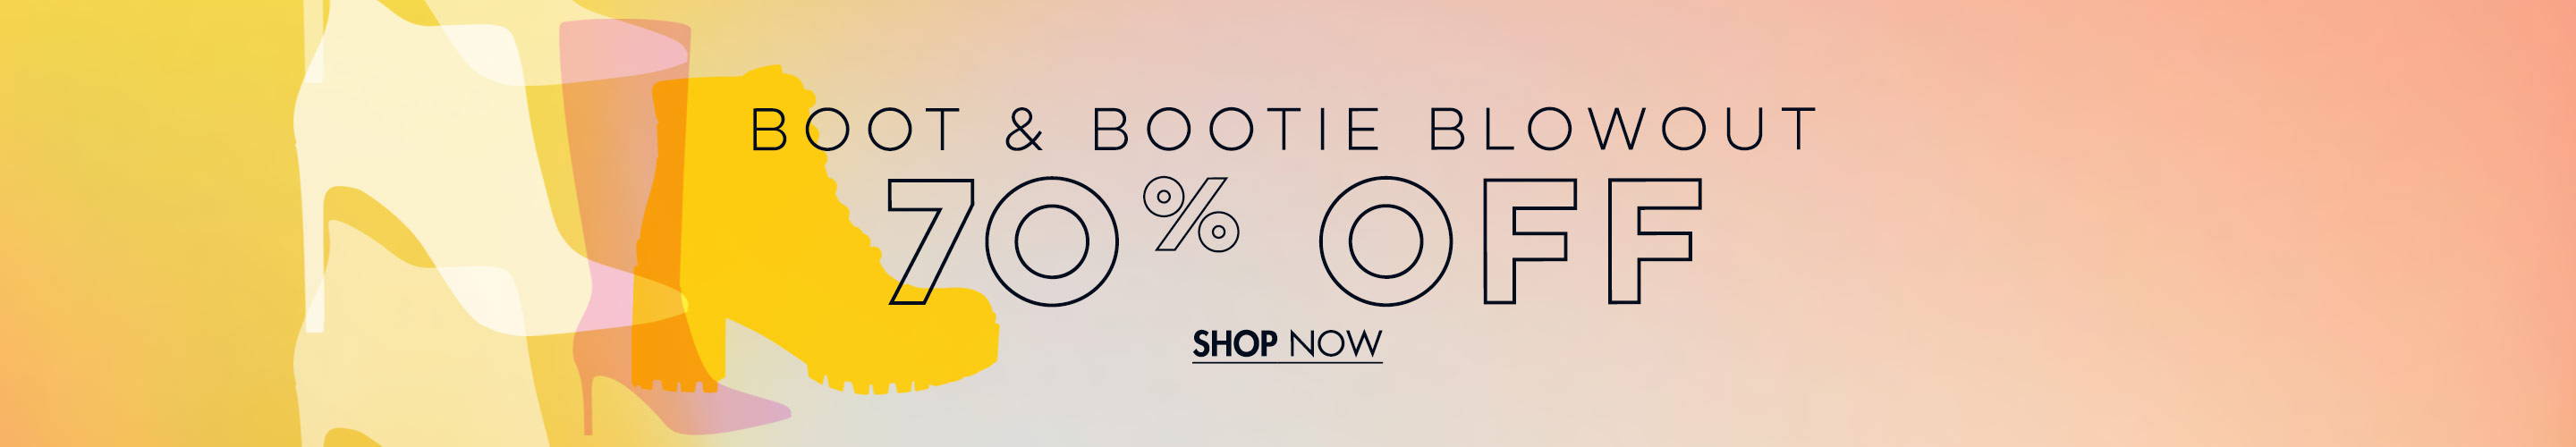 Boot & Bootie Blowout